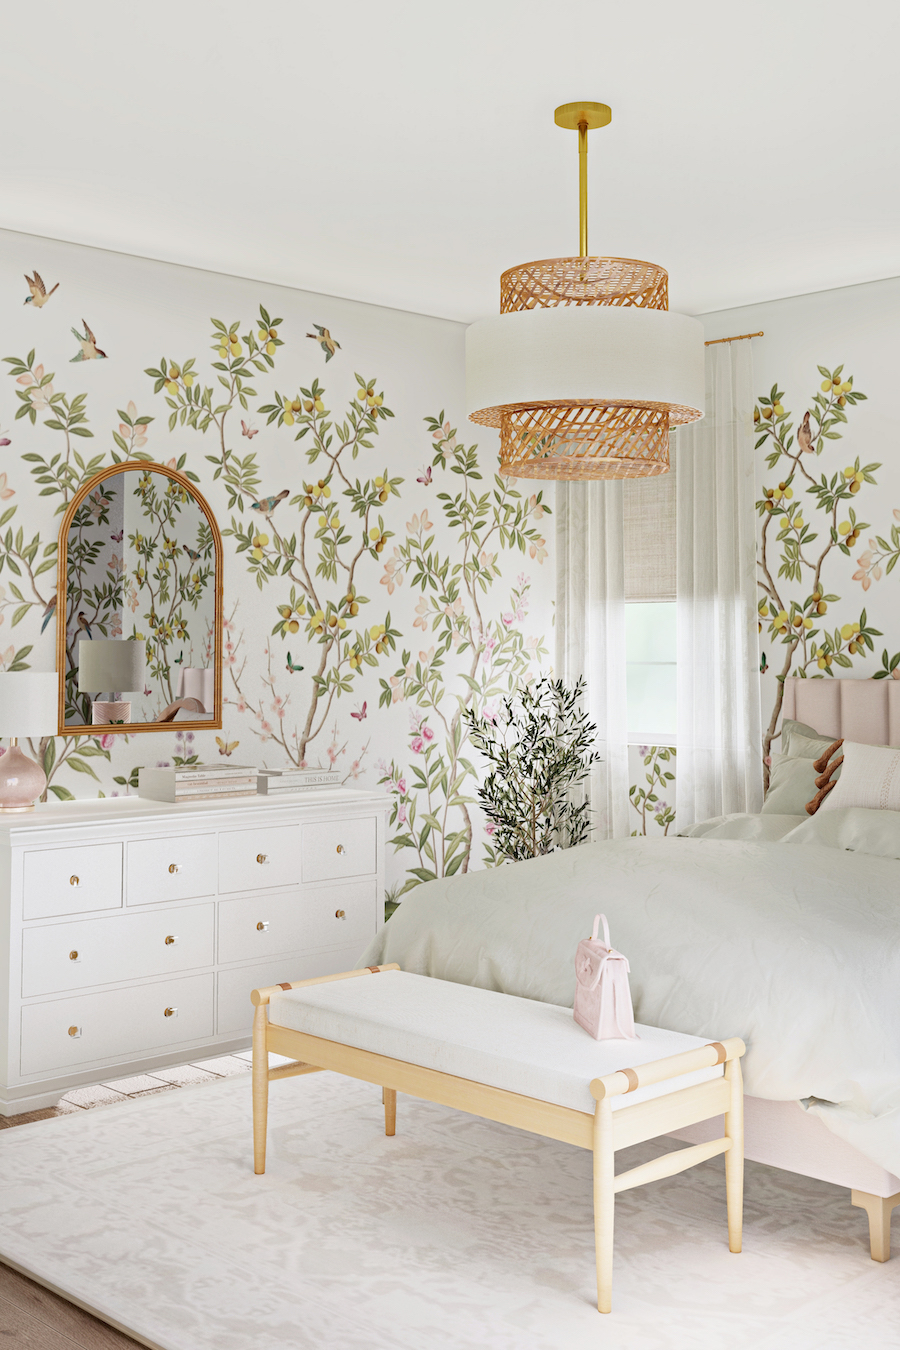 A Girl's Bedroom Design with Chinoiserie Wallpaper - Little Crown Interiors